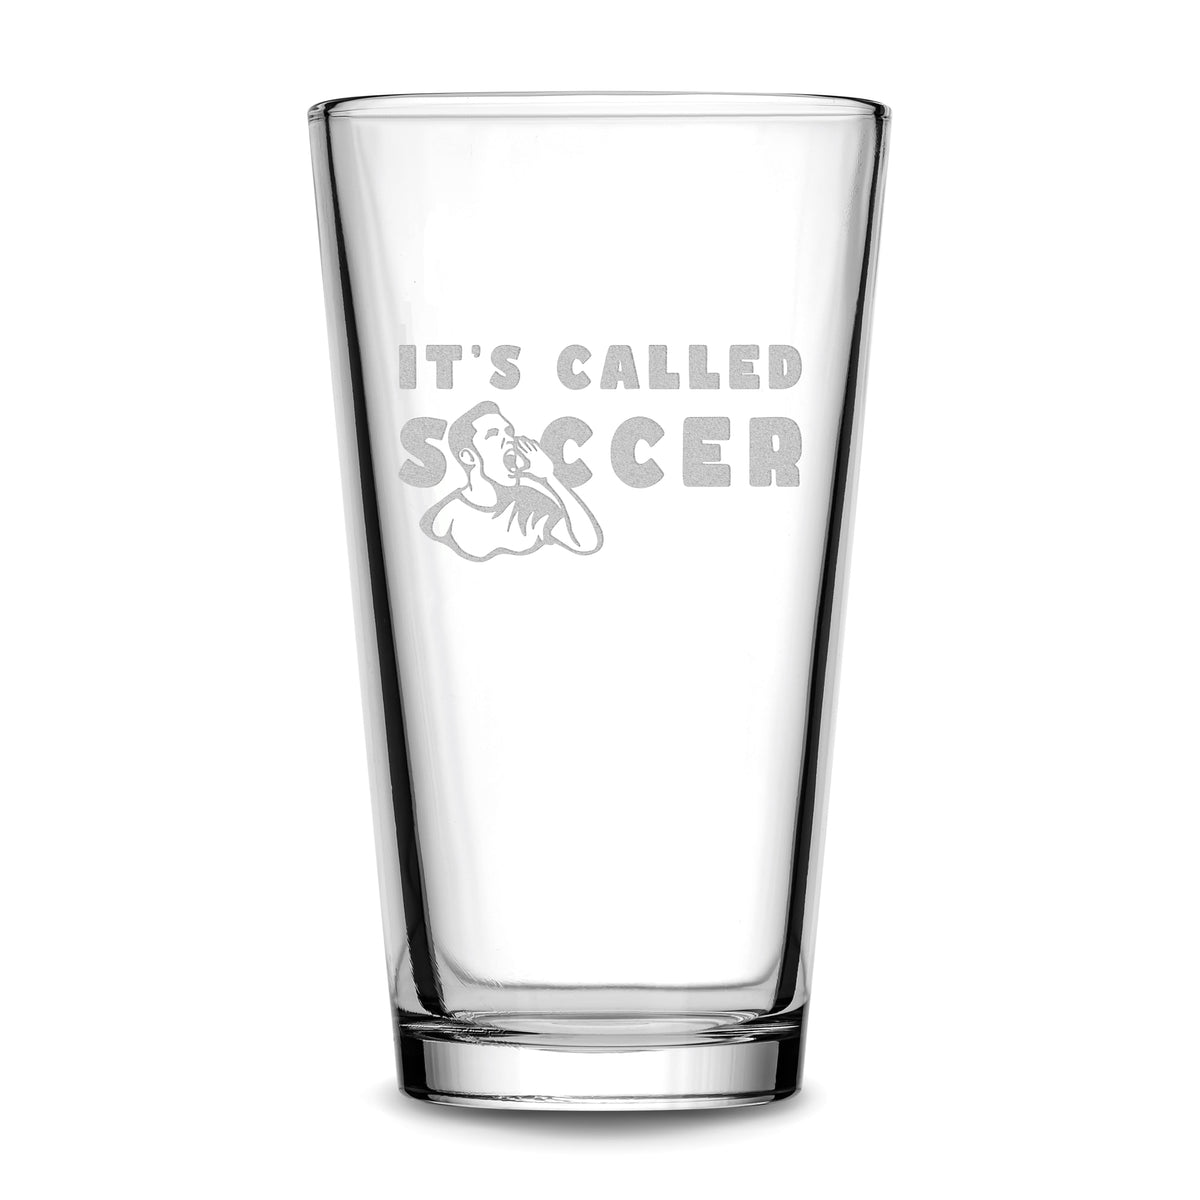 Beer Can Glass 16 oz. + Reviews